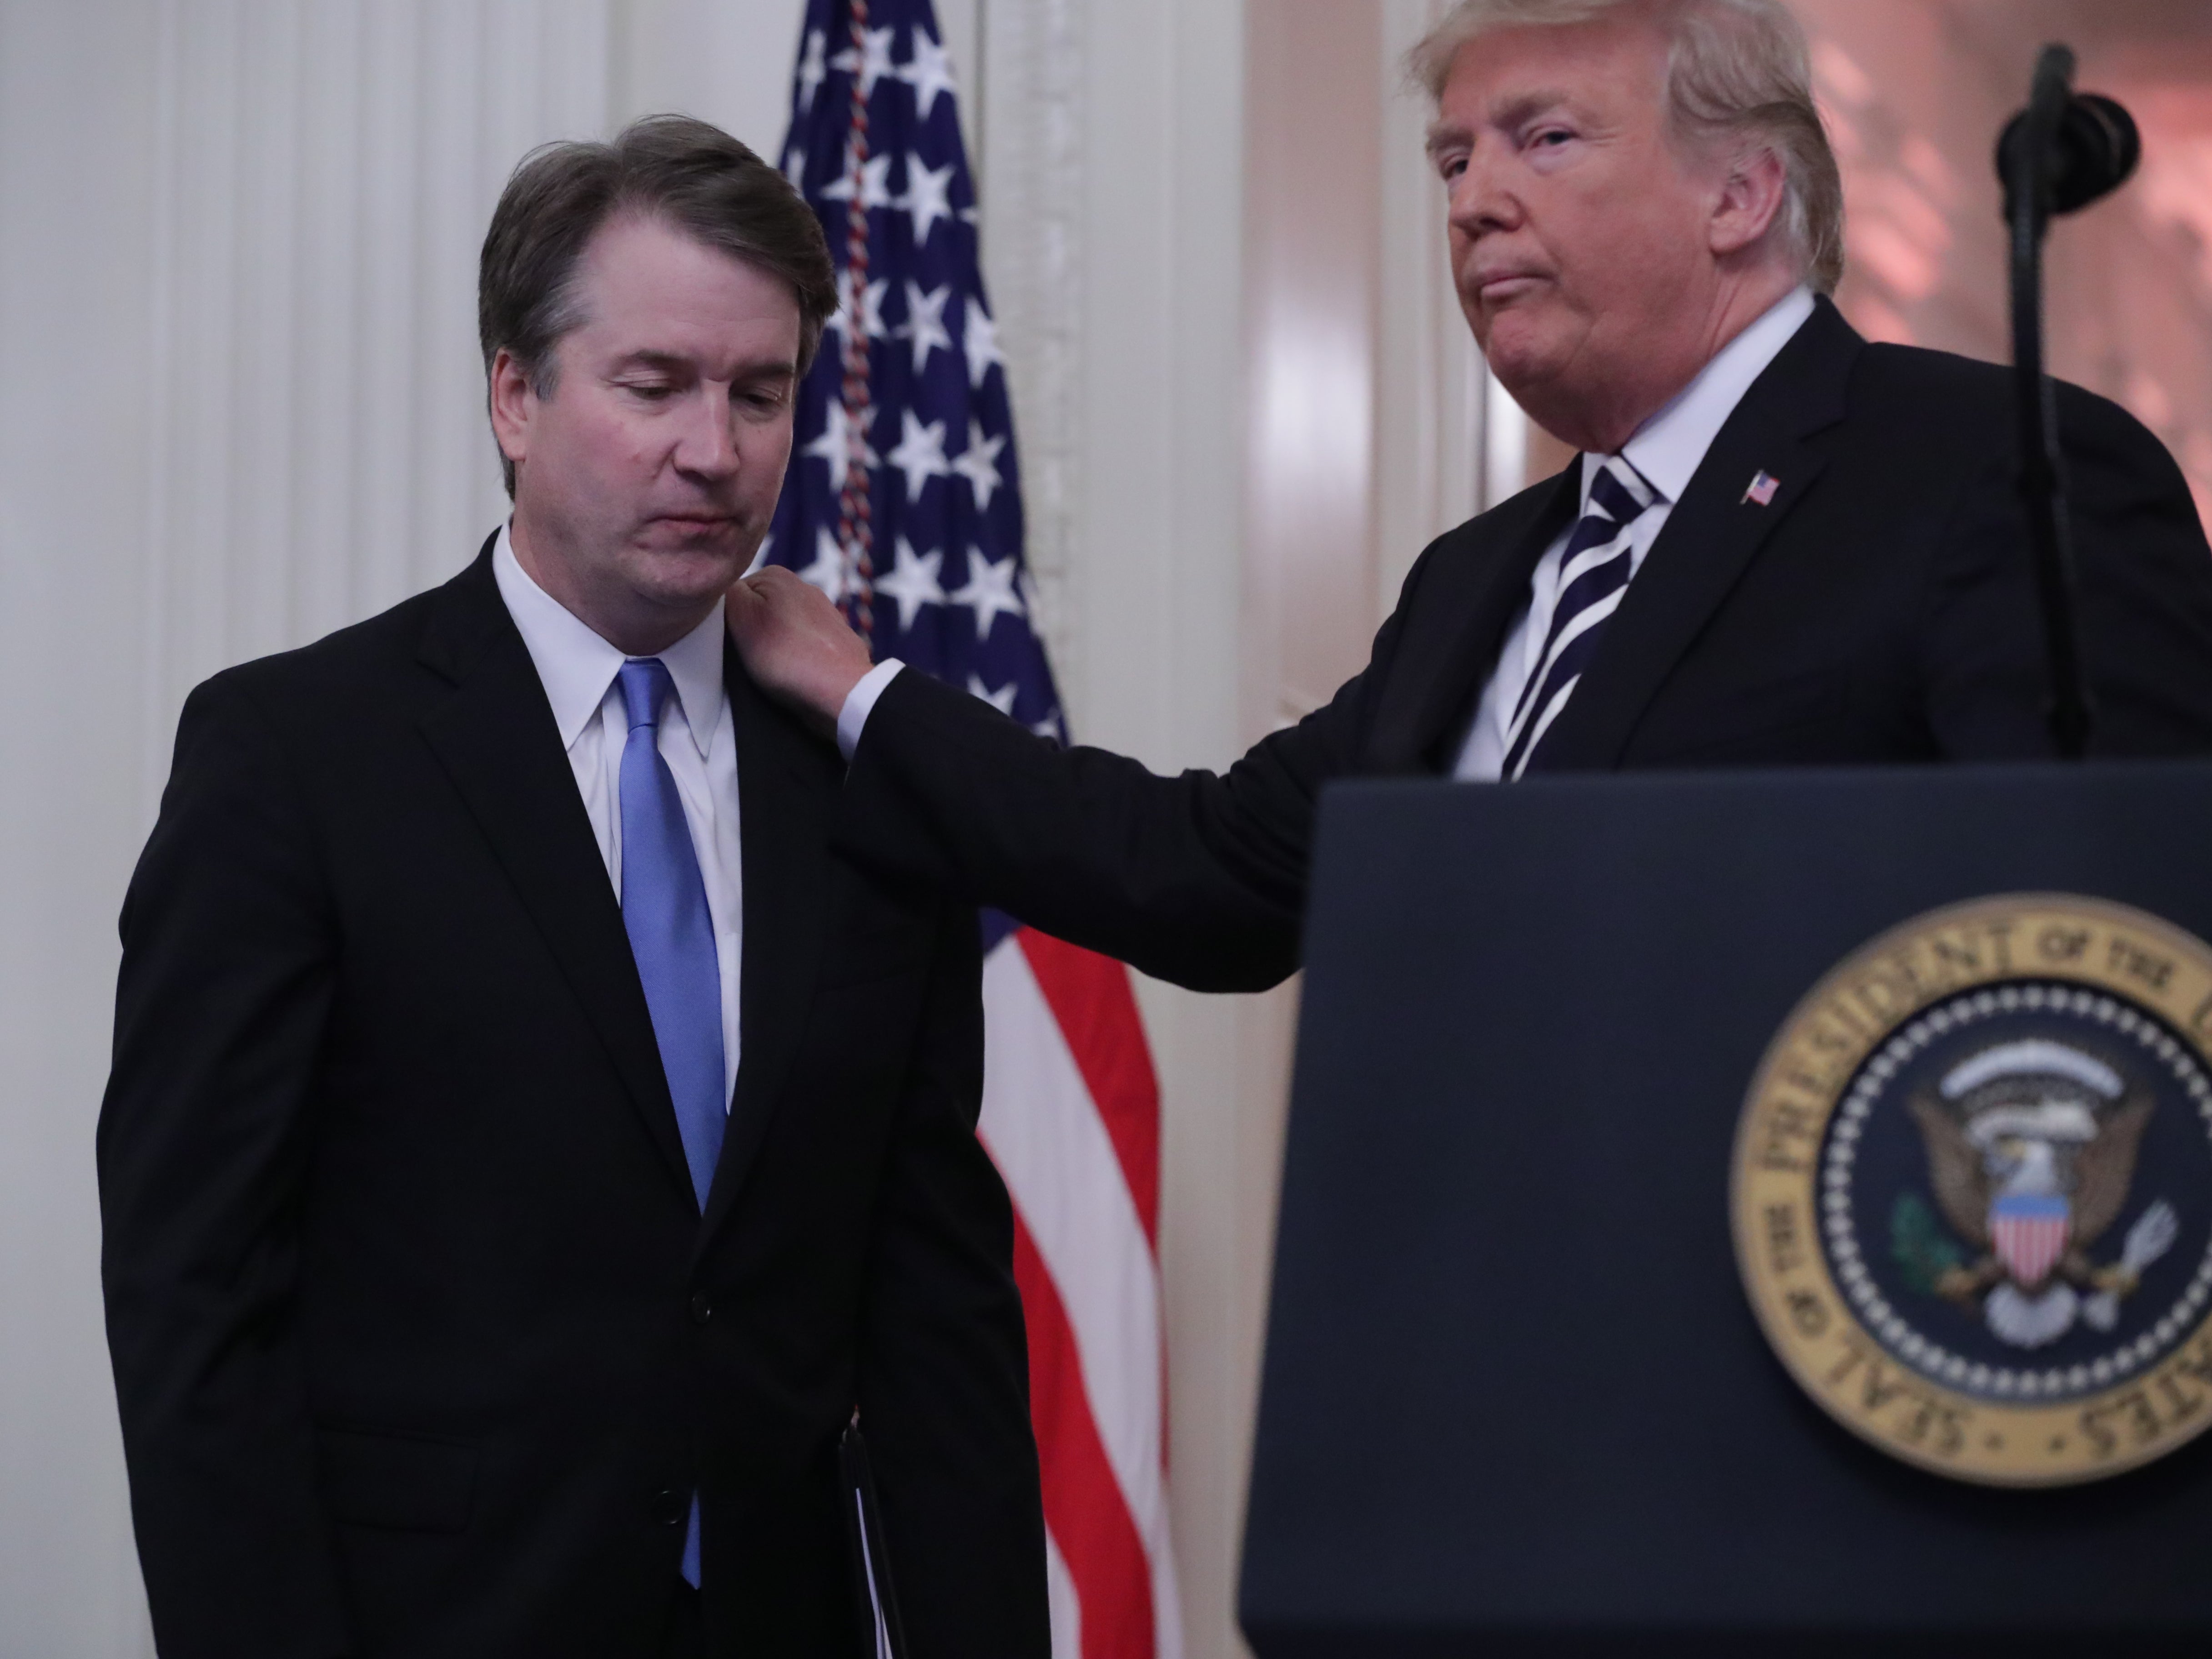 US Supreme Court Justice Brett Kavanaugh is greeted by President Donald Trump at a Kavanaugh’s ceremonial swearing in